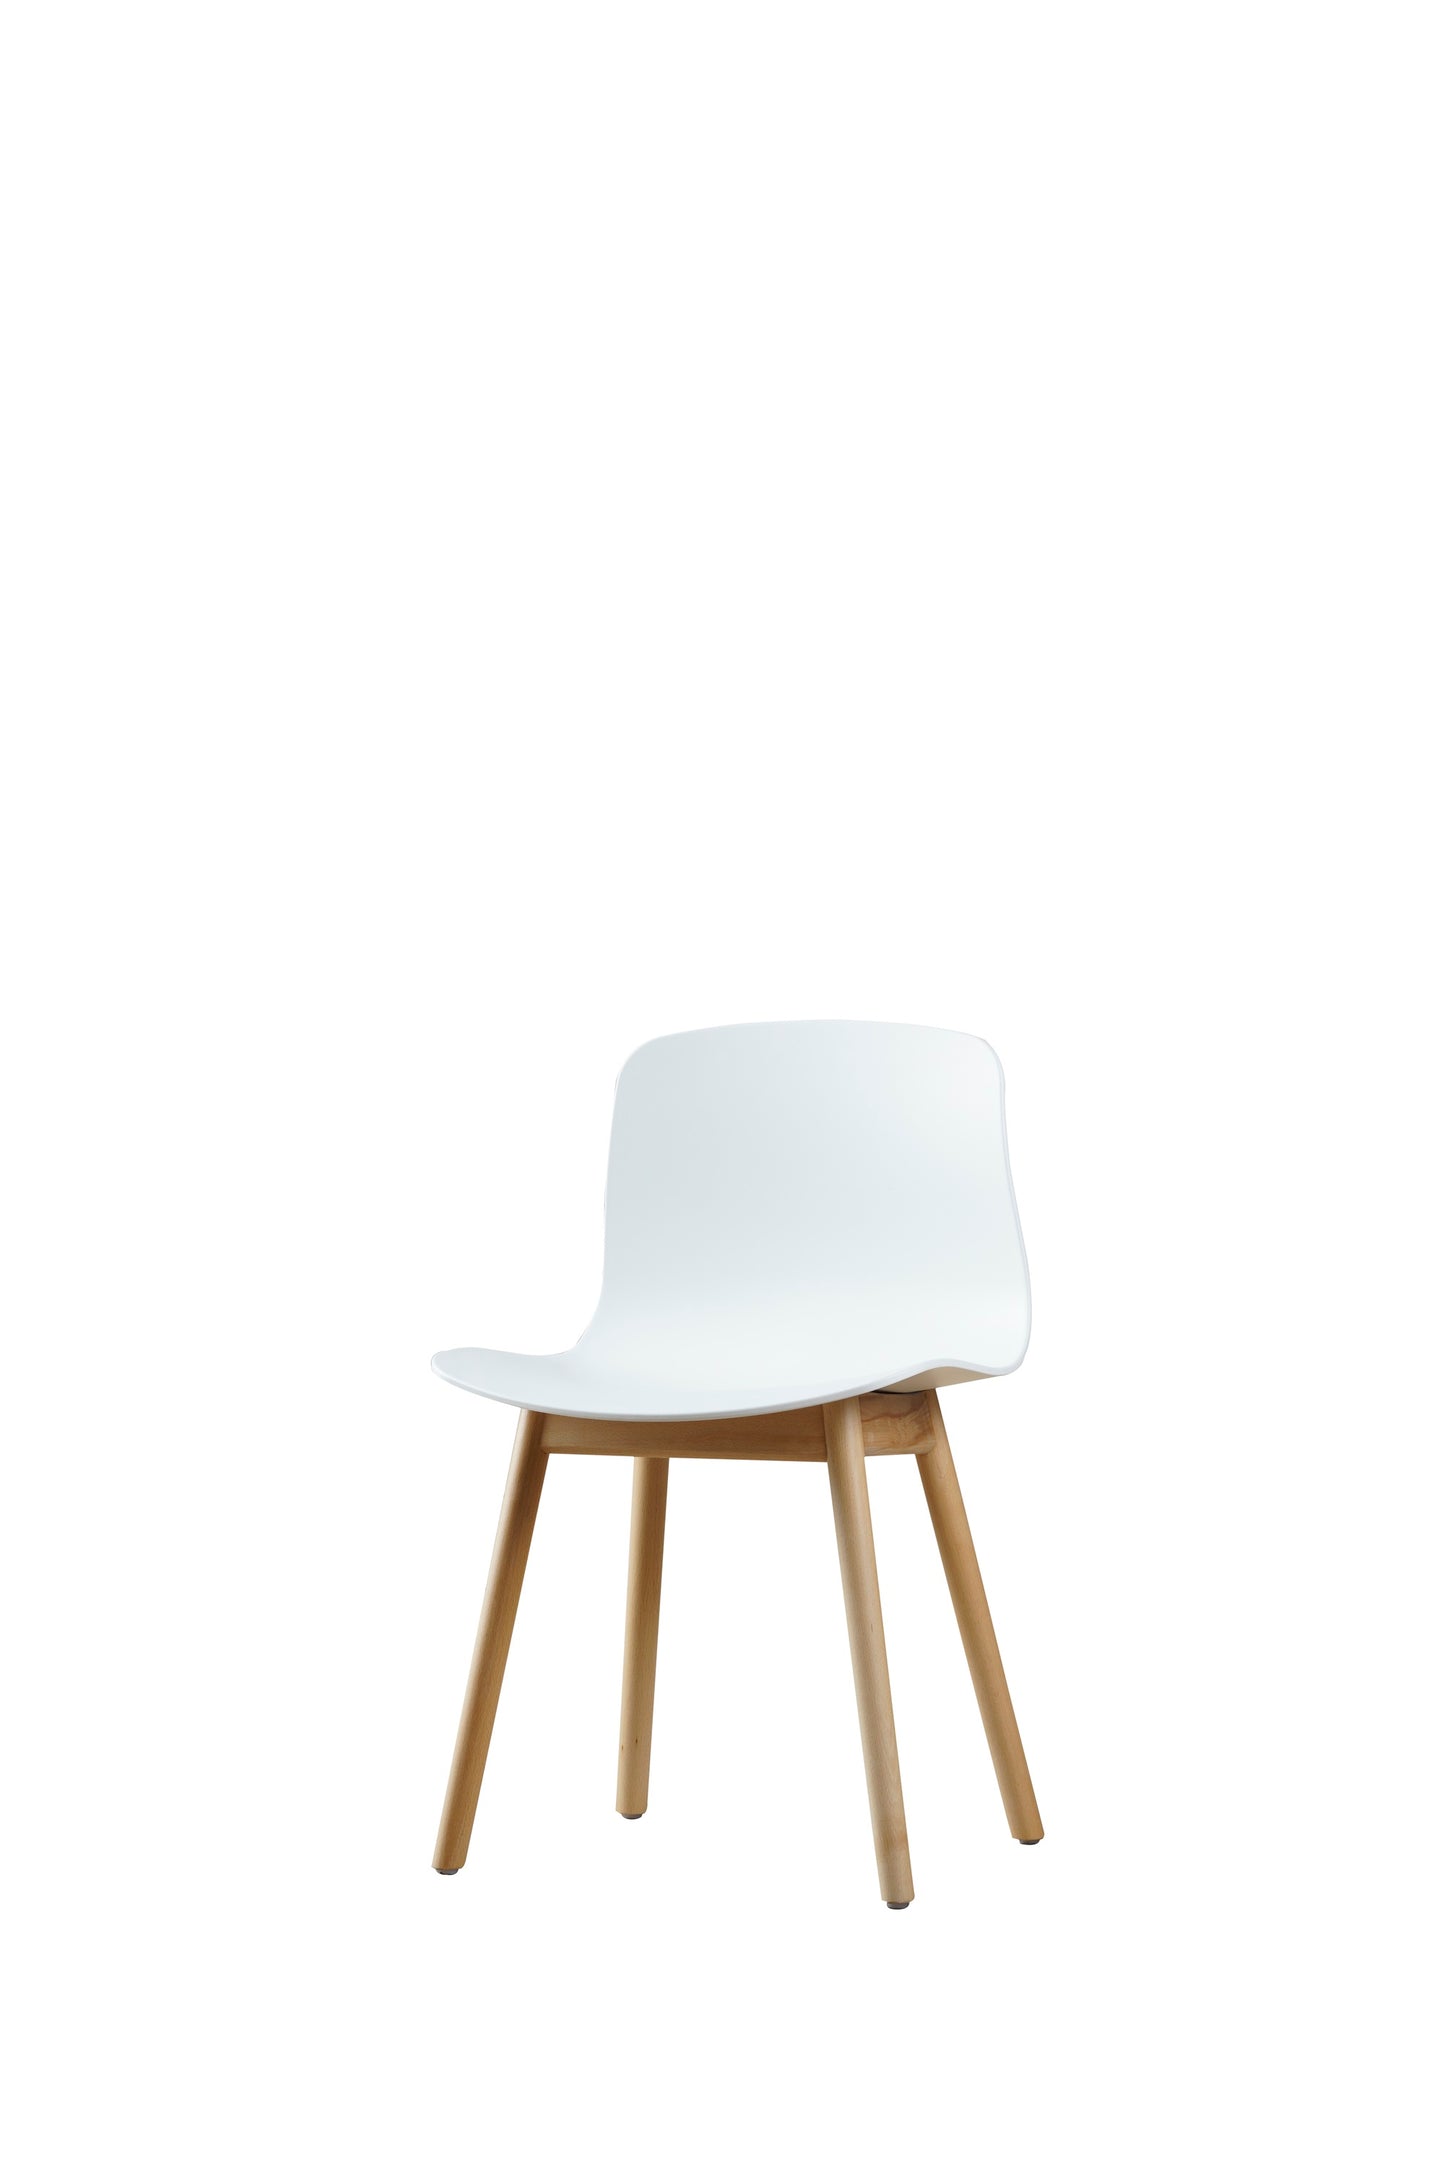 Adapt Full Upholstered Chair with Wood Base 4006